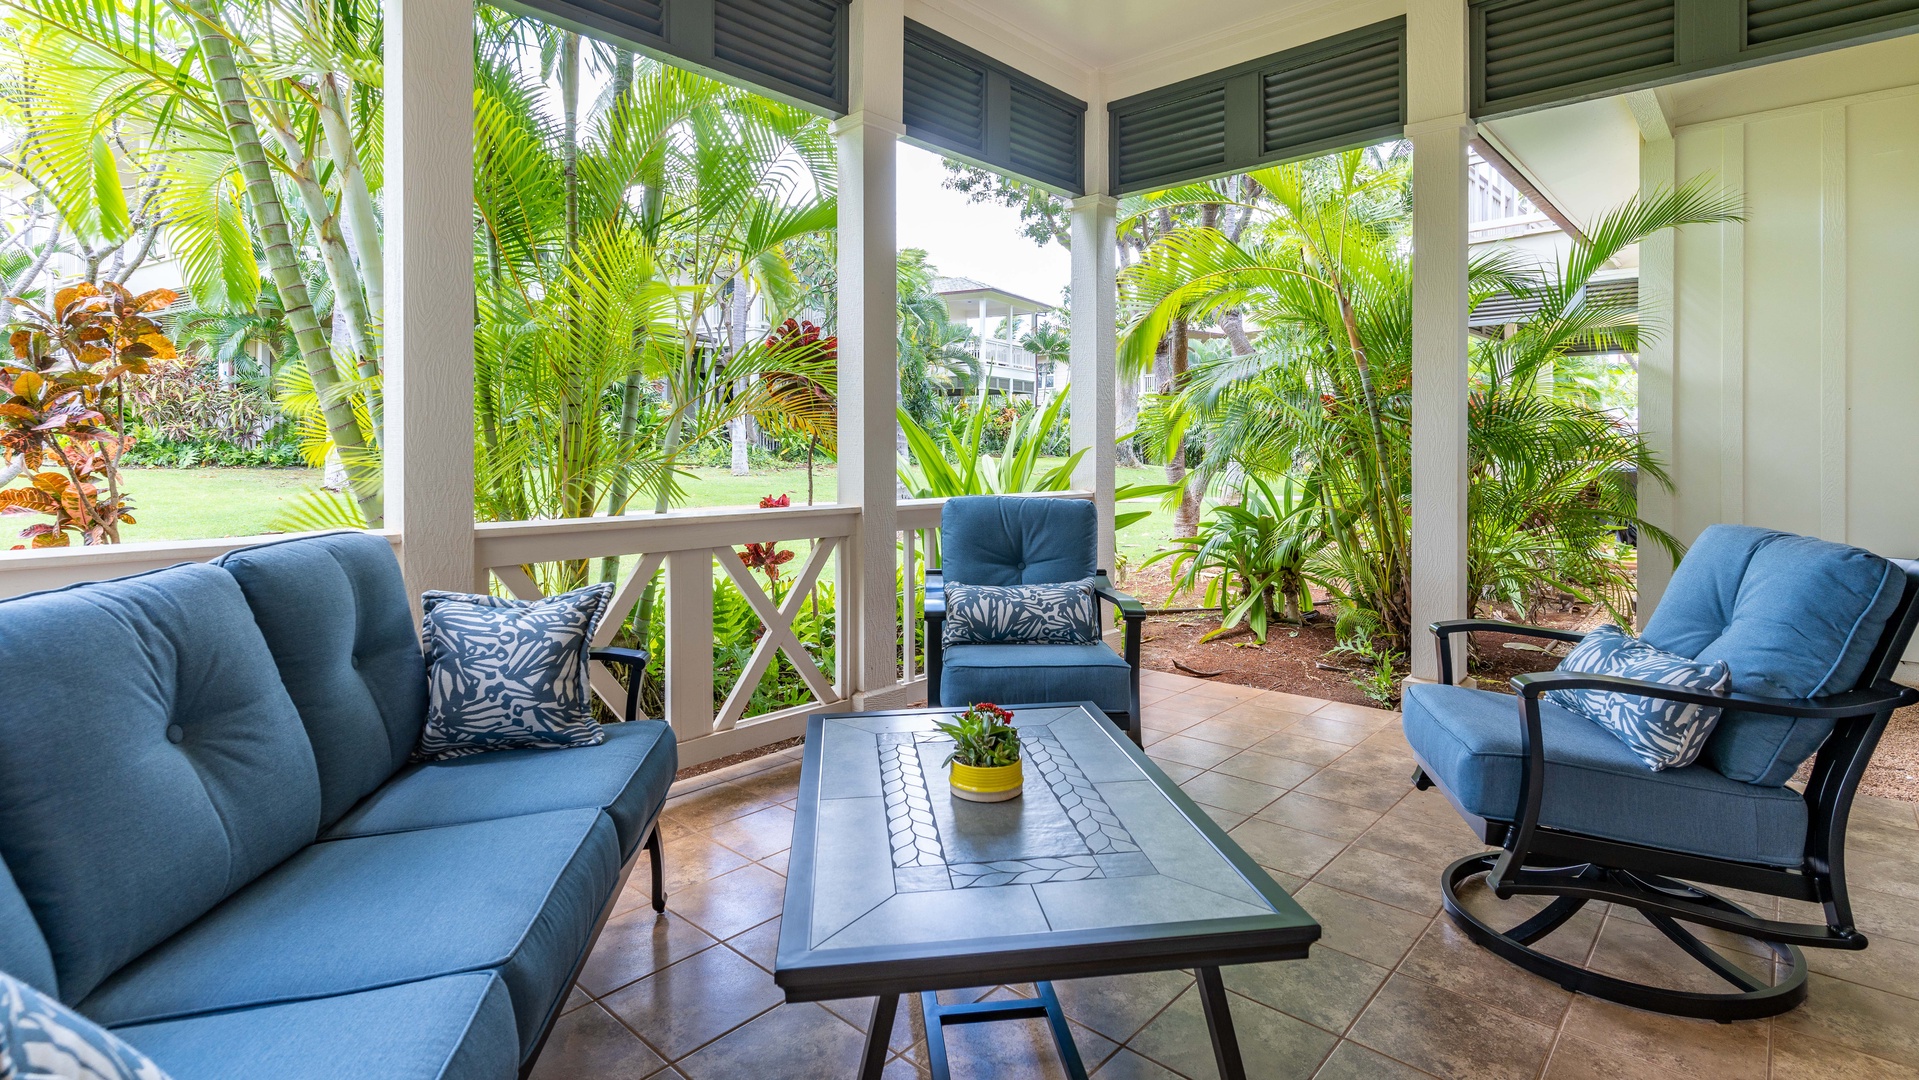 Kapolei Vacation Rentals, Coconut Plantation 1208-2 - An enchanting setting for drinks on the lanai.